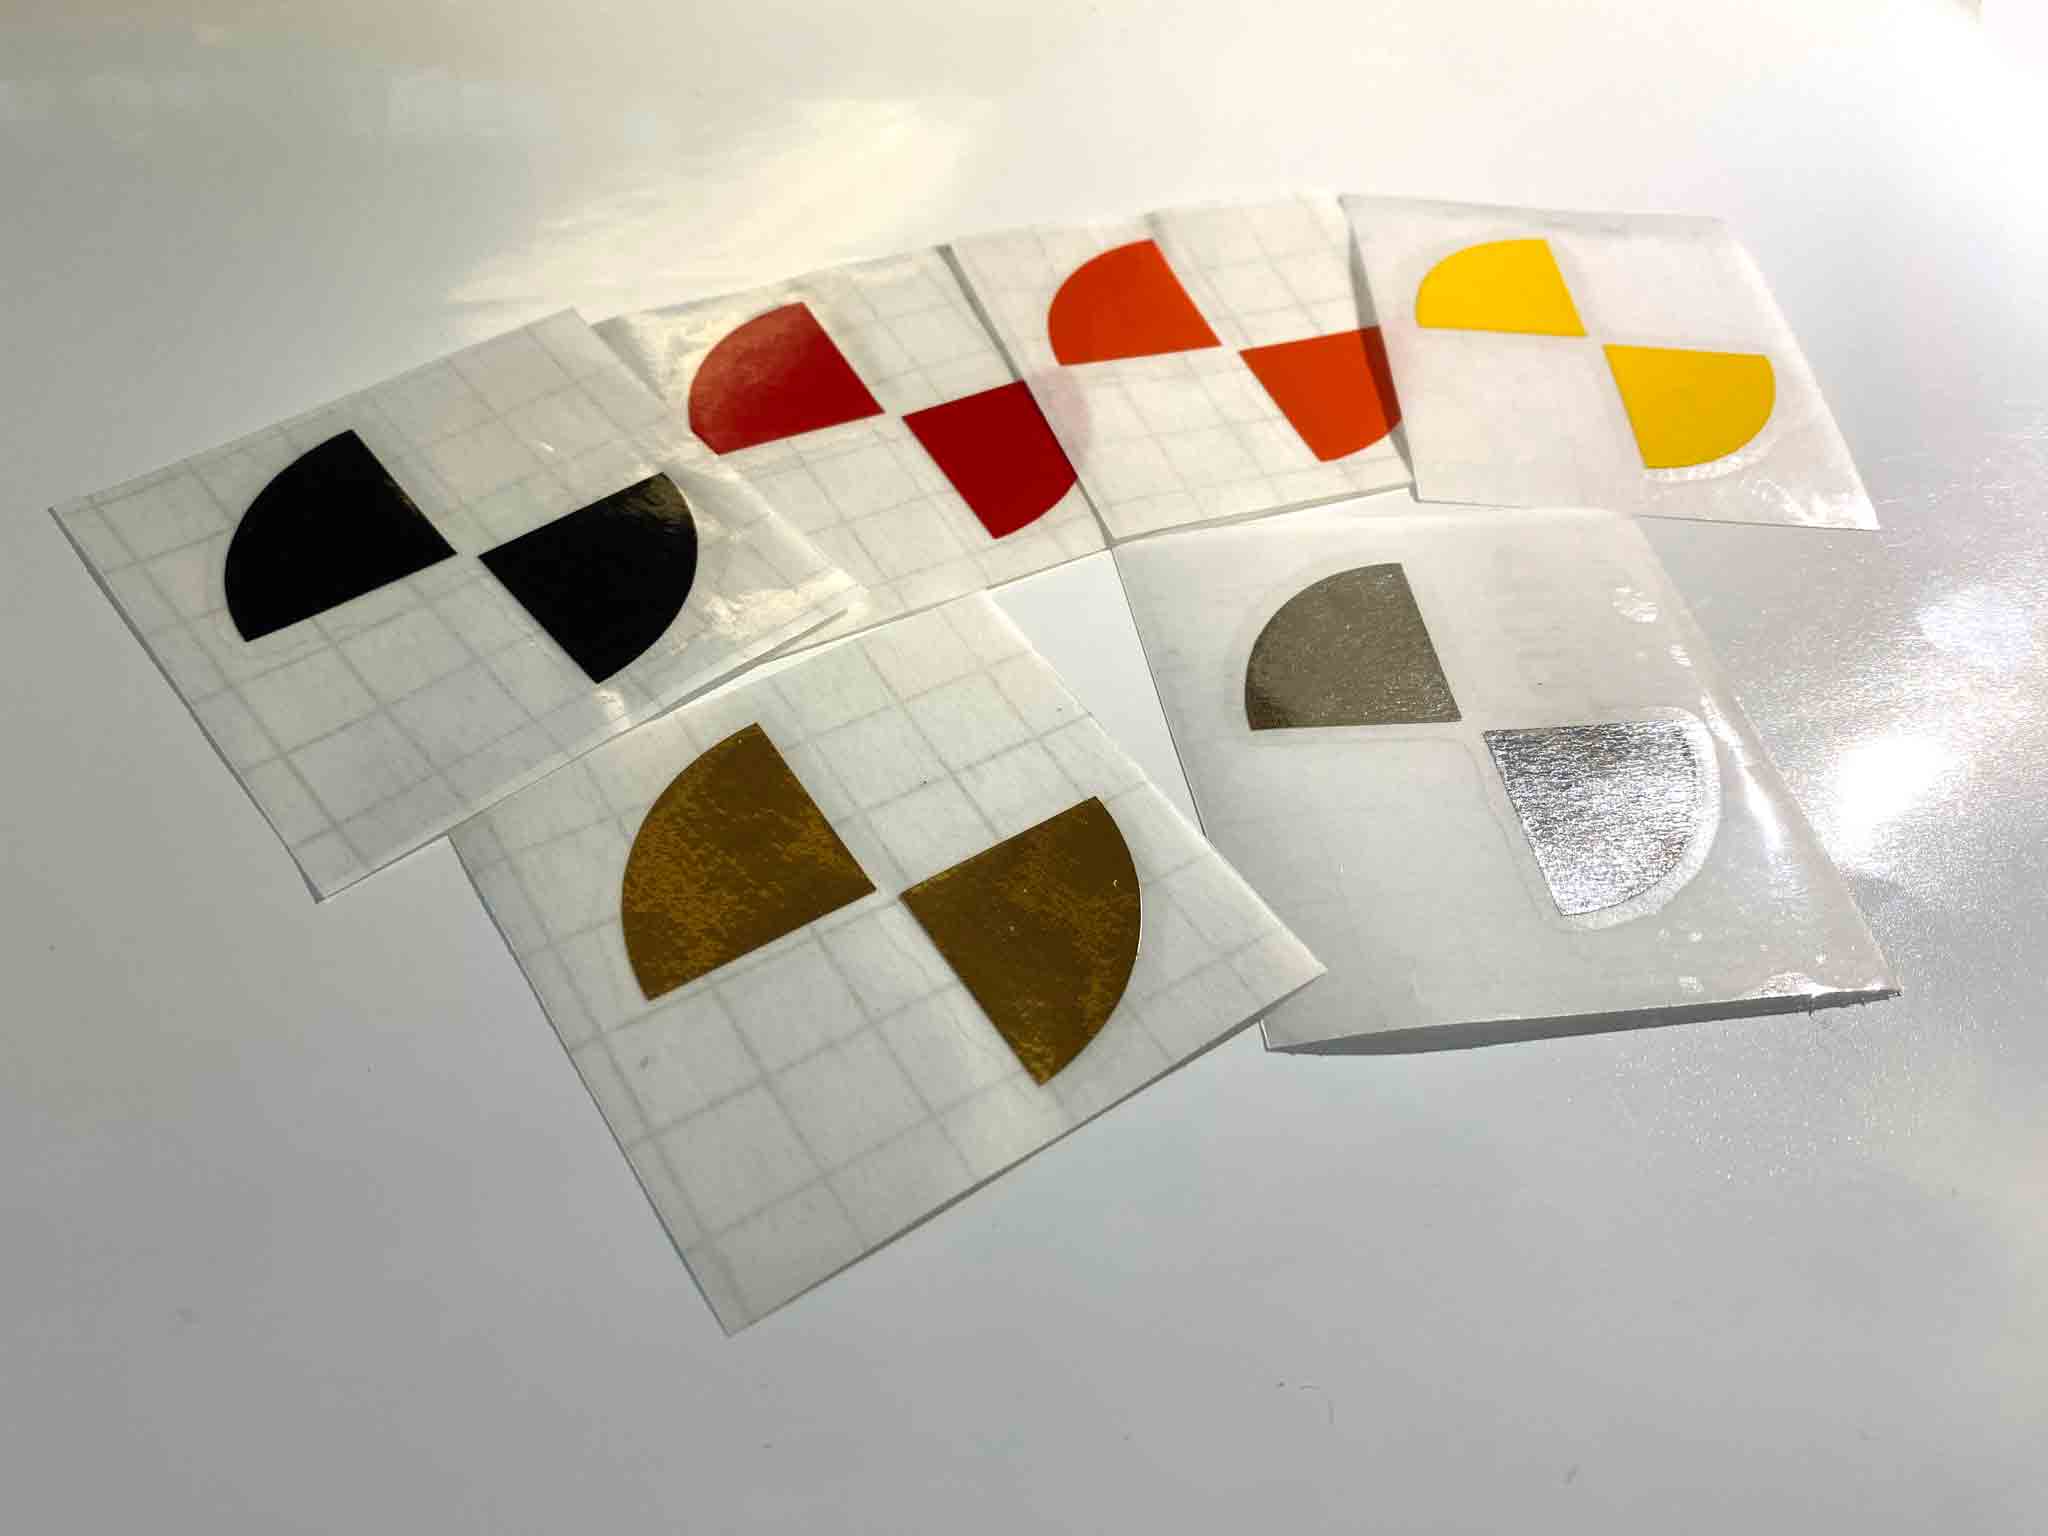 We offer variety of colors for your BMW roundel emblem